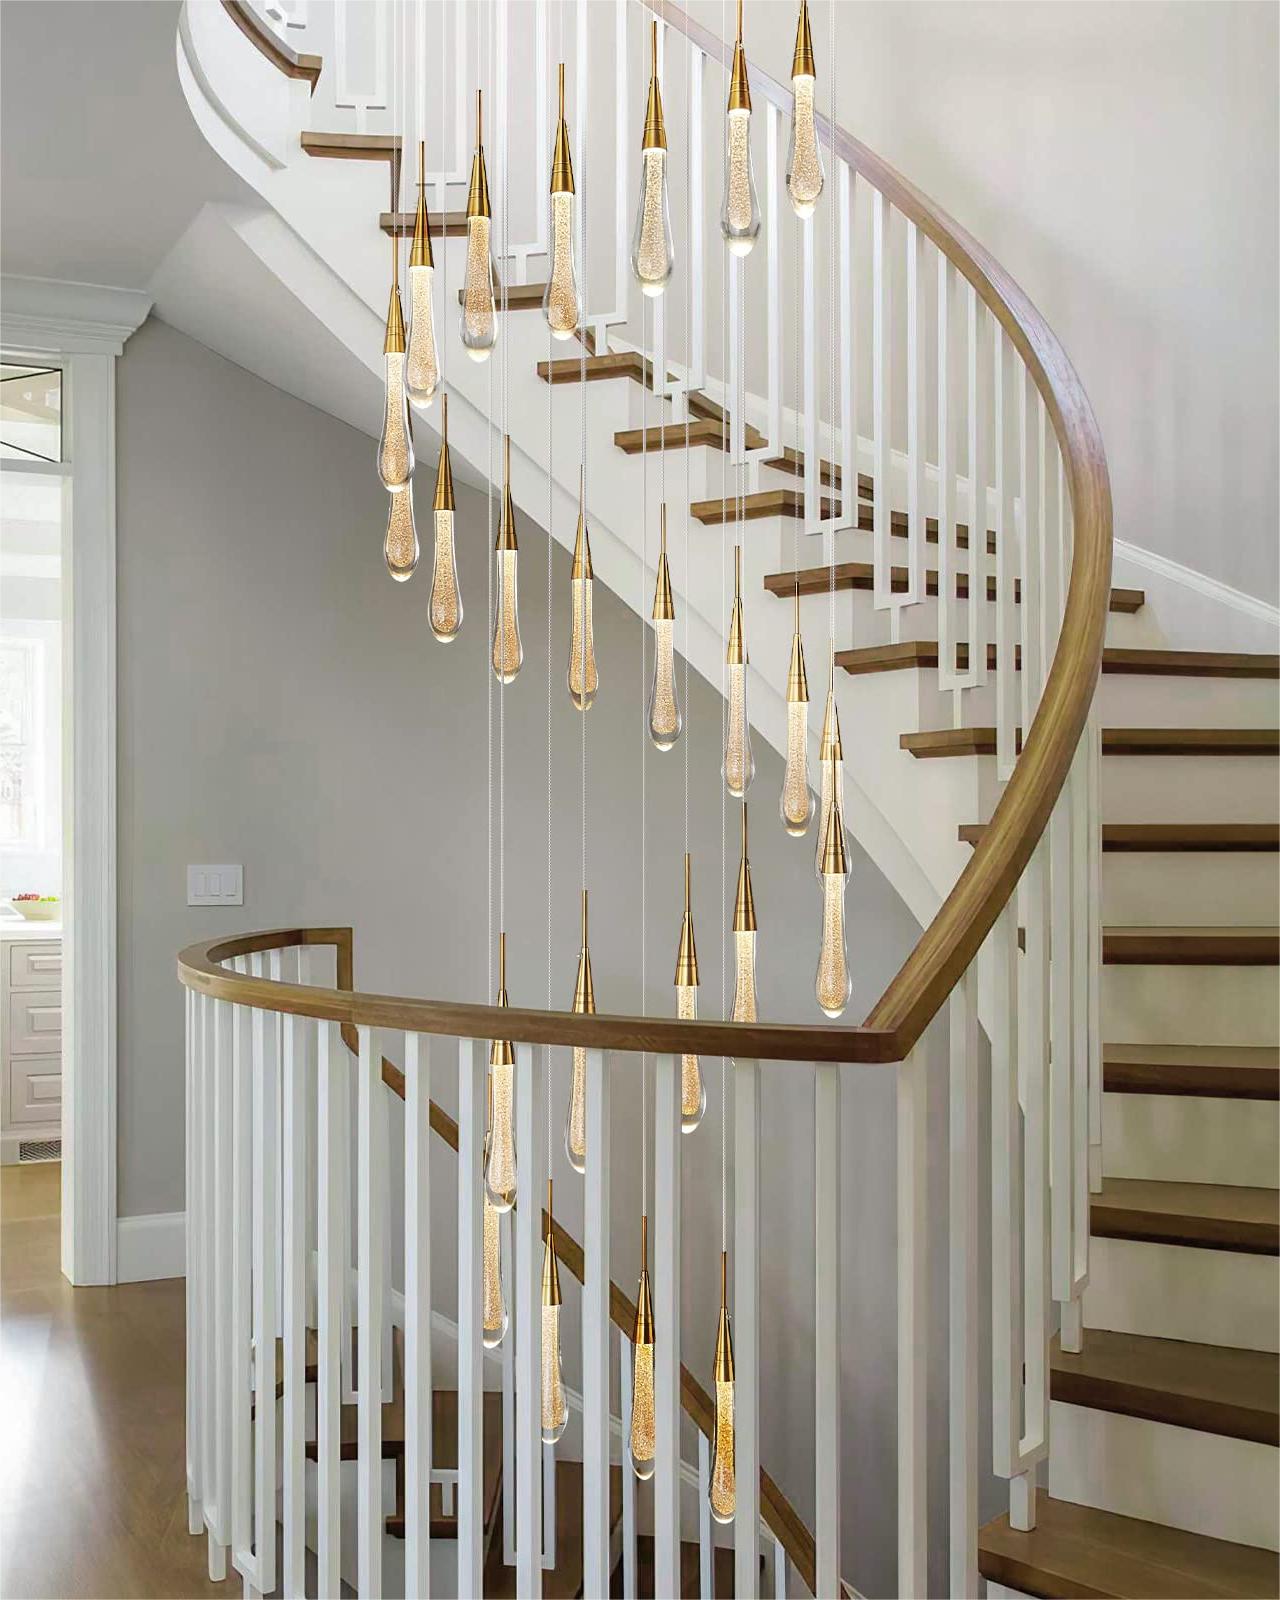 Sleek design for staircase ambiance